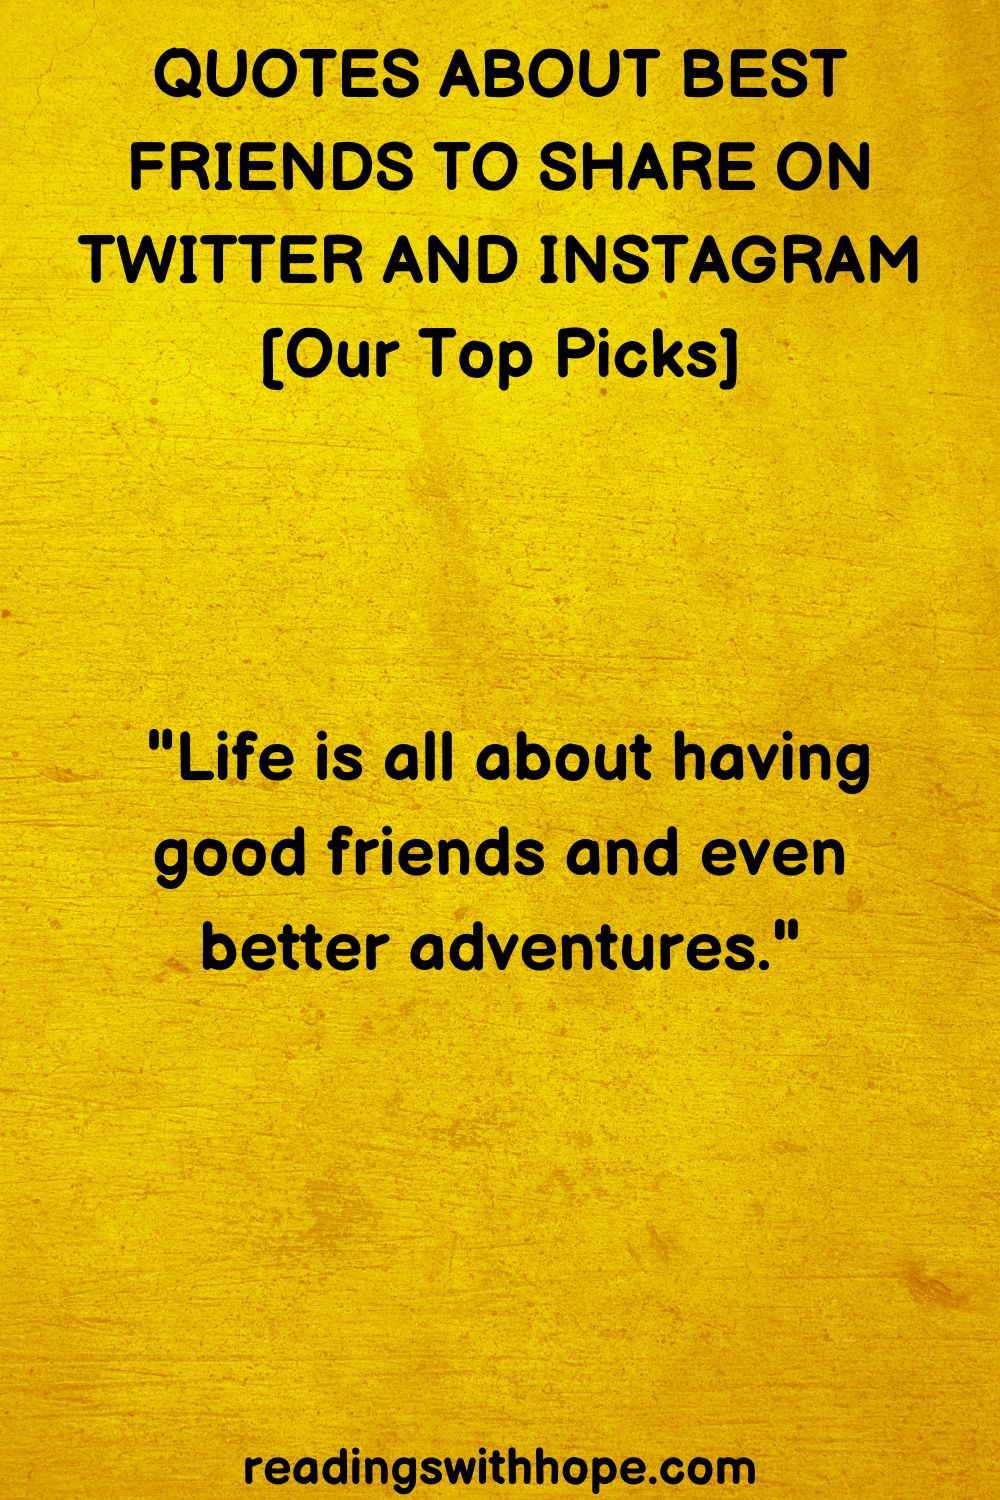 quotes about best friends to share on twitter and instagram